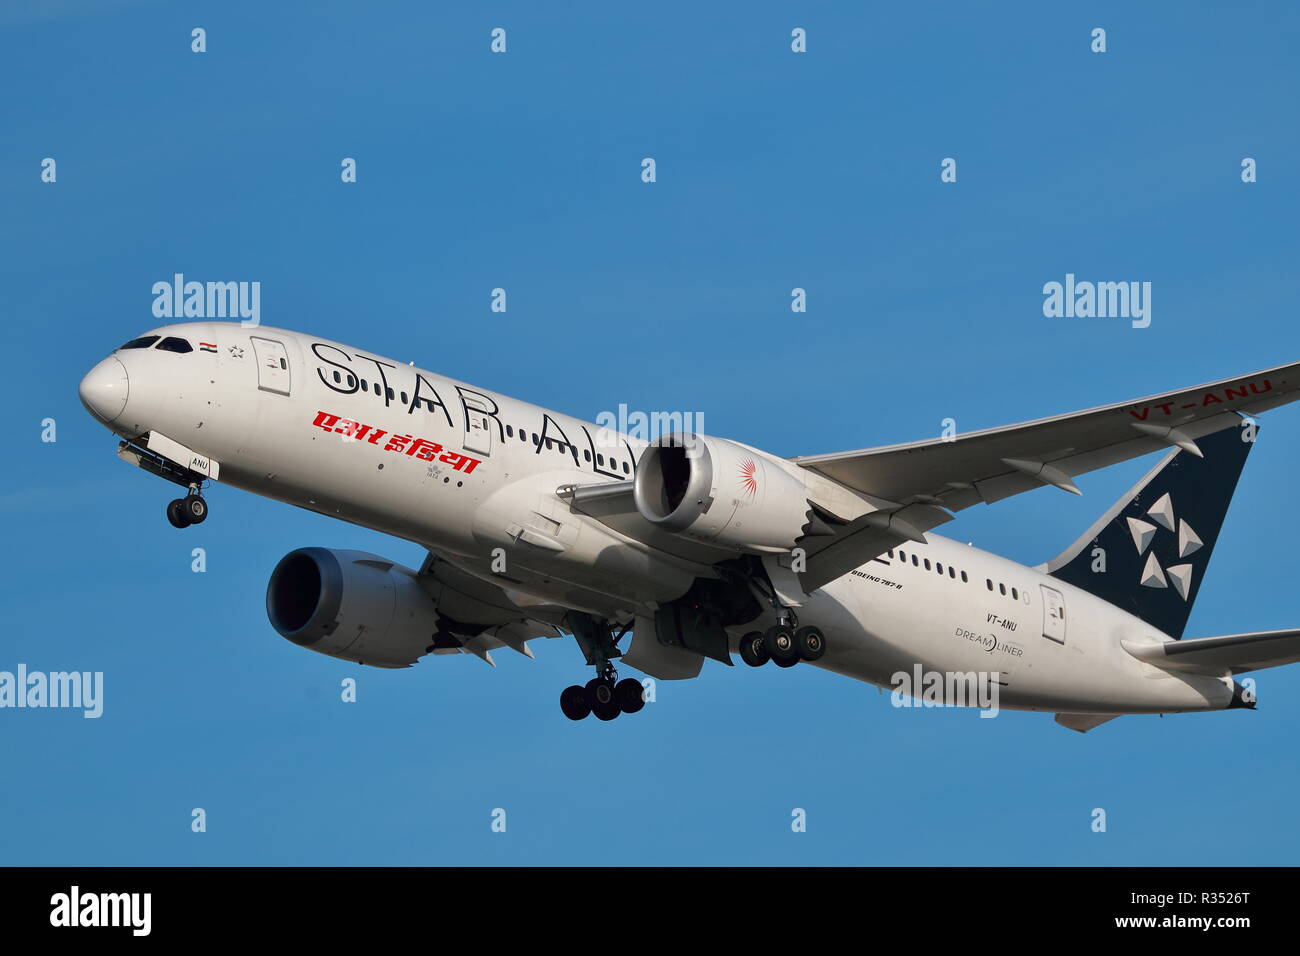 Air India Boeing 787-8 Dreamliner VT-ANU Star Alliance takes off at London Heathrow Airport, UK Stock Photo